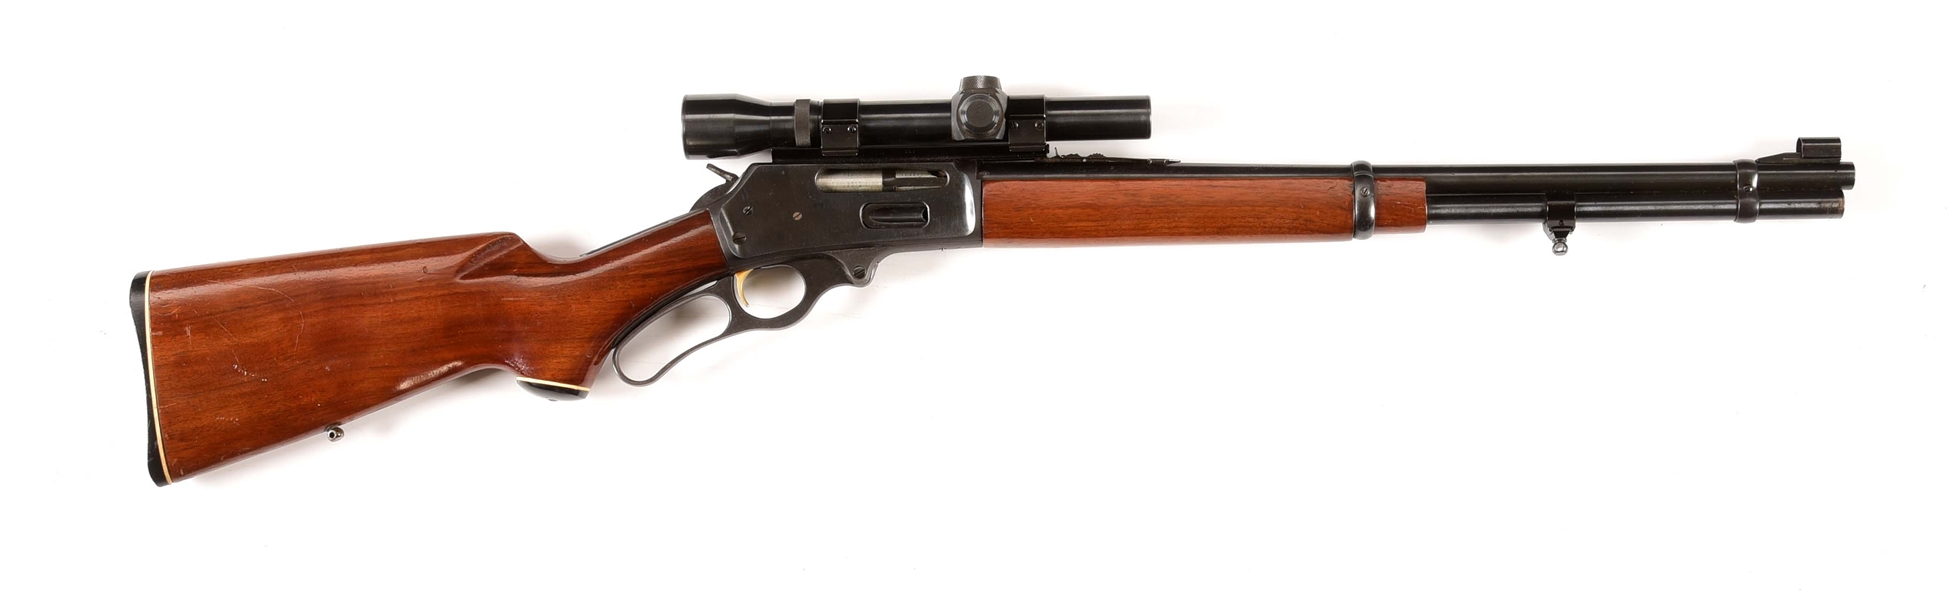 (C) MARLIN MODEL 336 LEVER ACTION RIFLE.